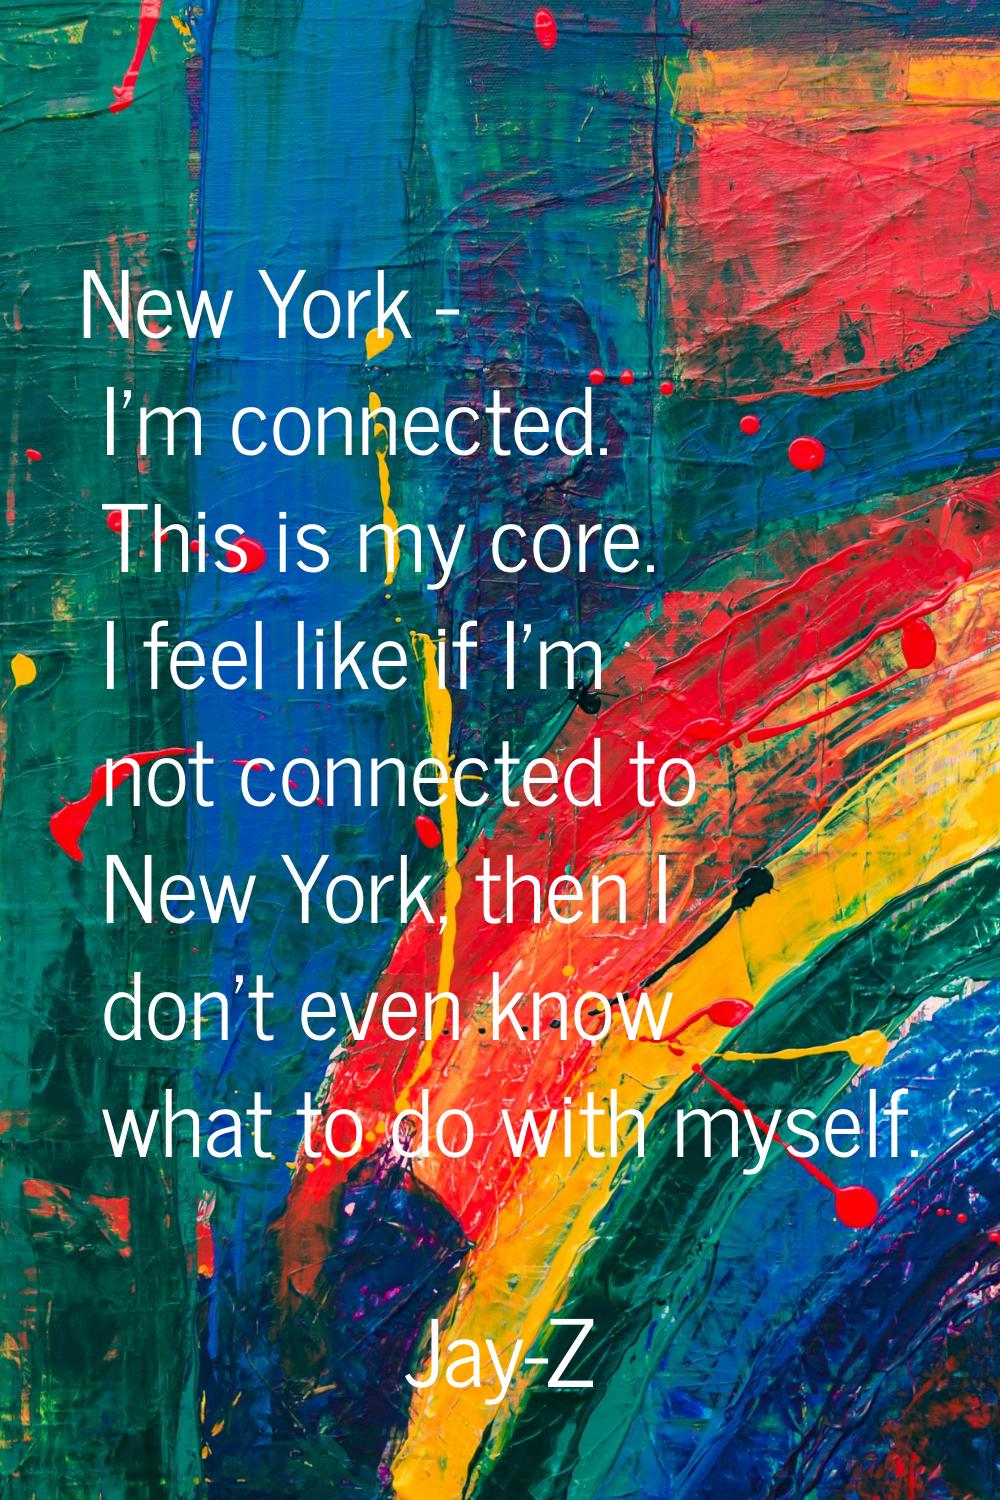 New York - I'm connected. This is my core. I feel like if I'm not connected to New York, then I don